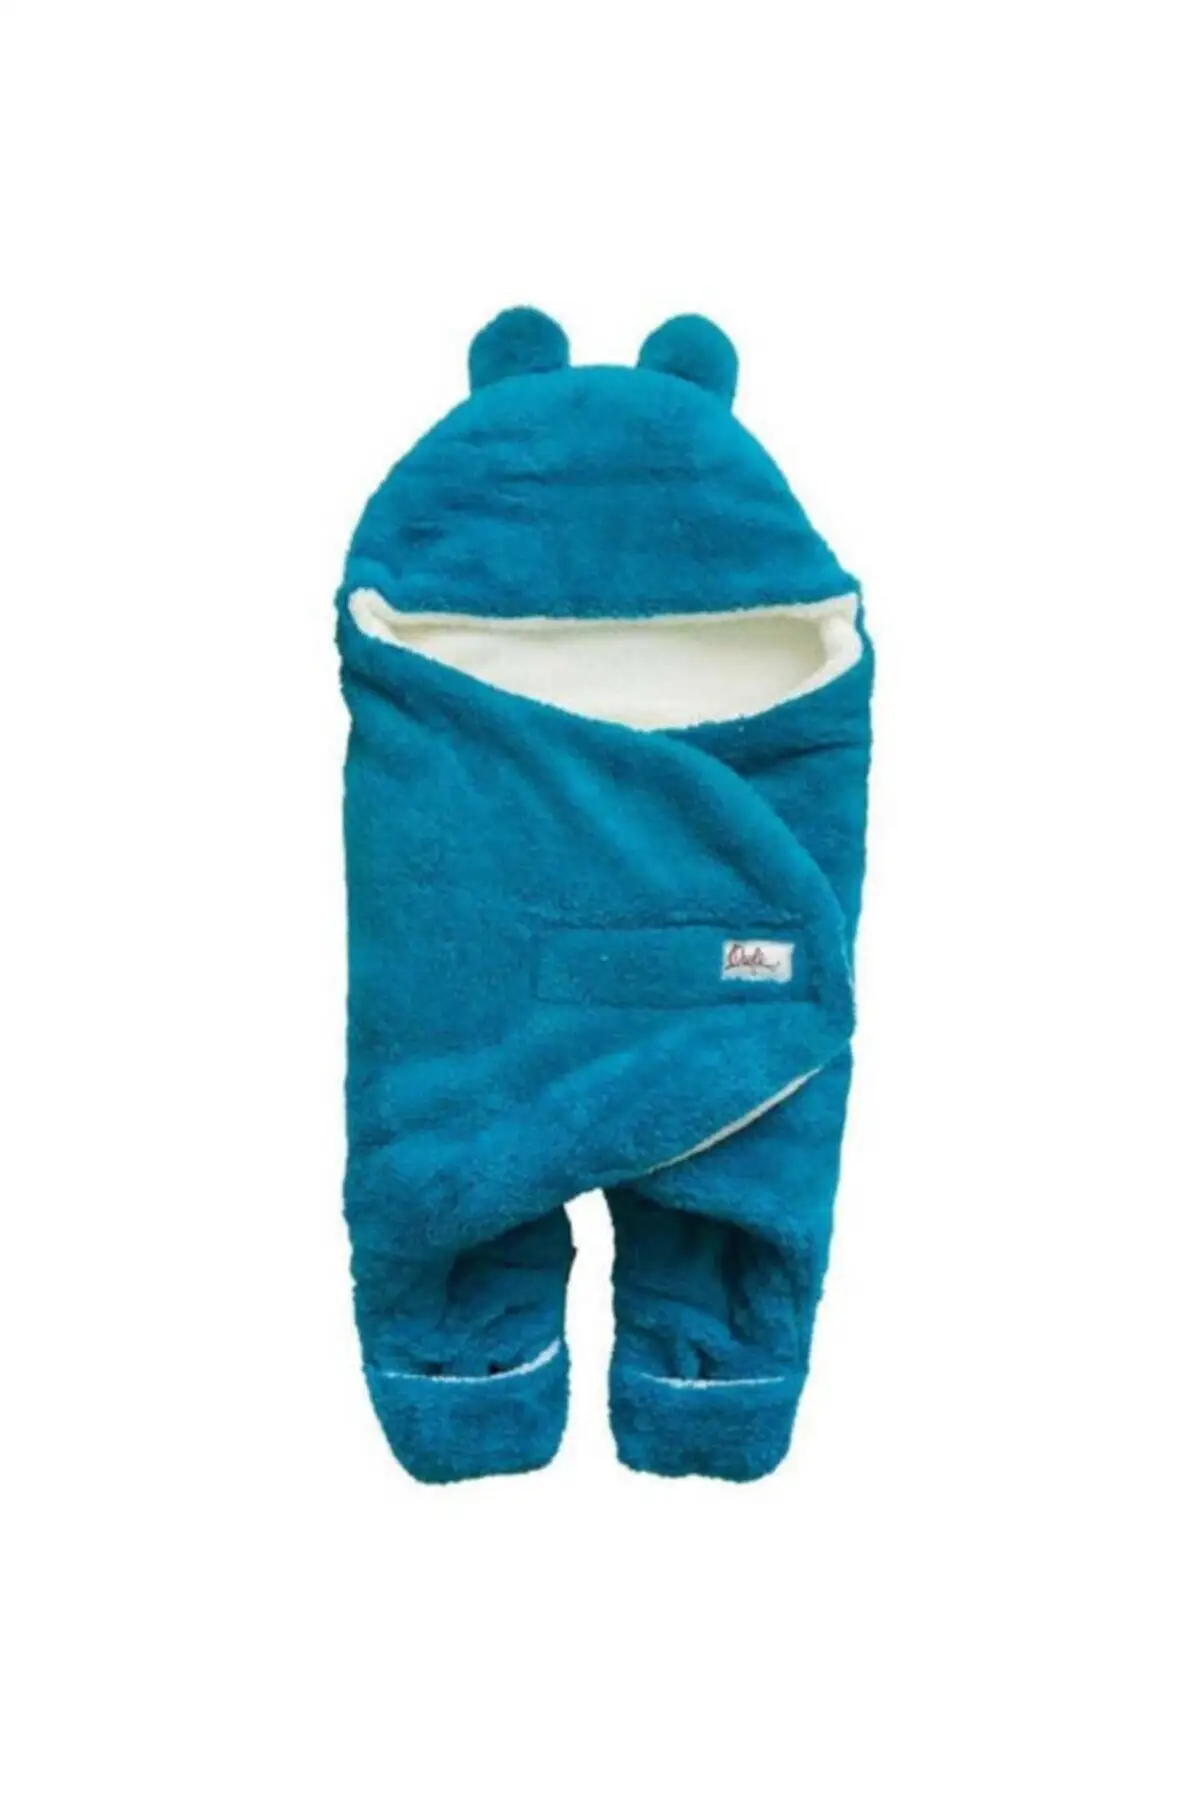 Baby Winter Outwear Swaddle Blanket 0-6 Month-turquoise Sleeping bag Clothing